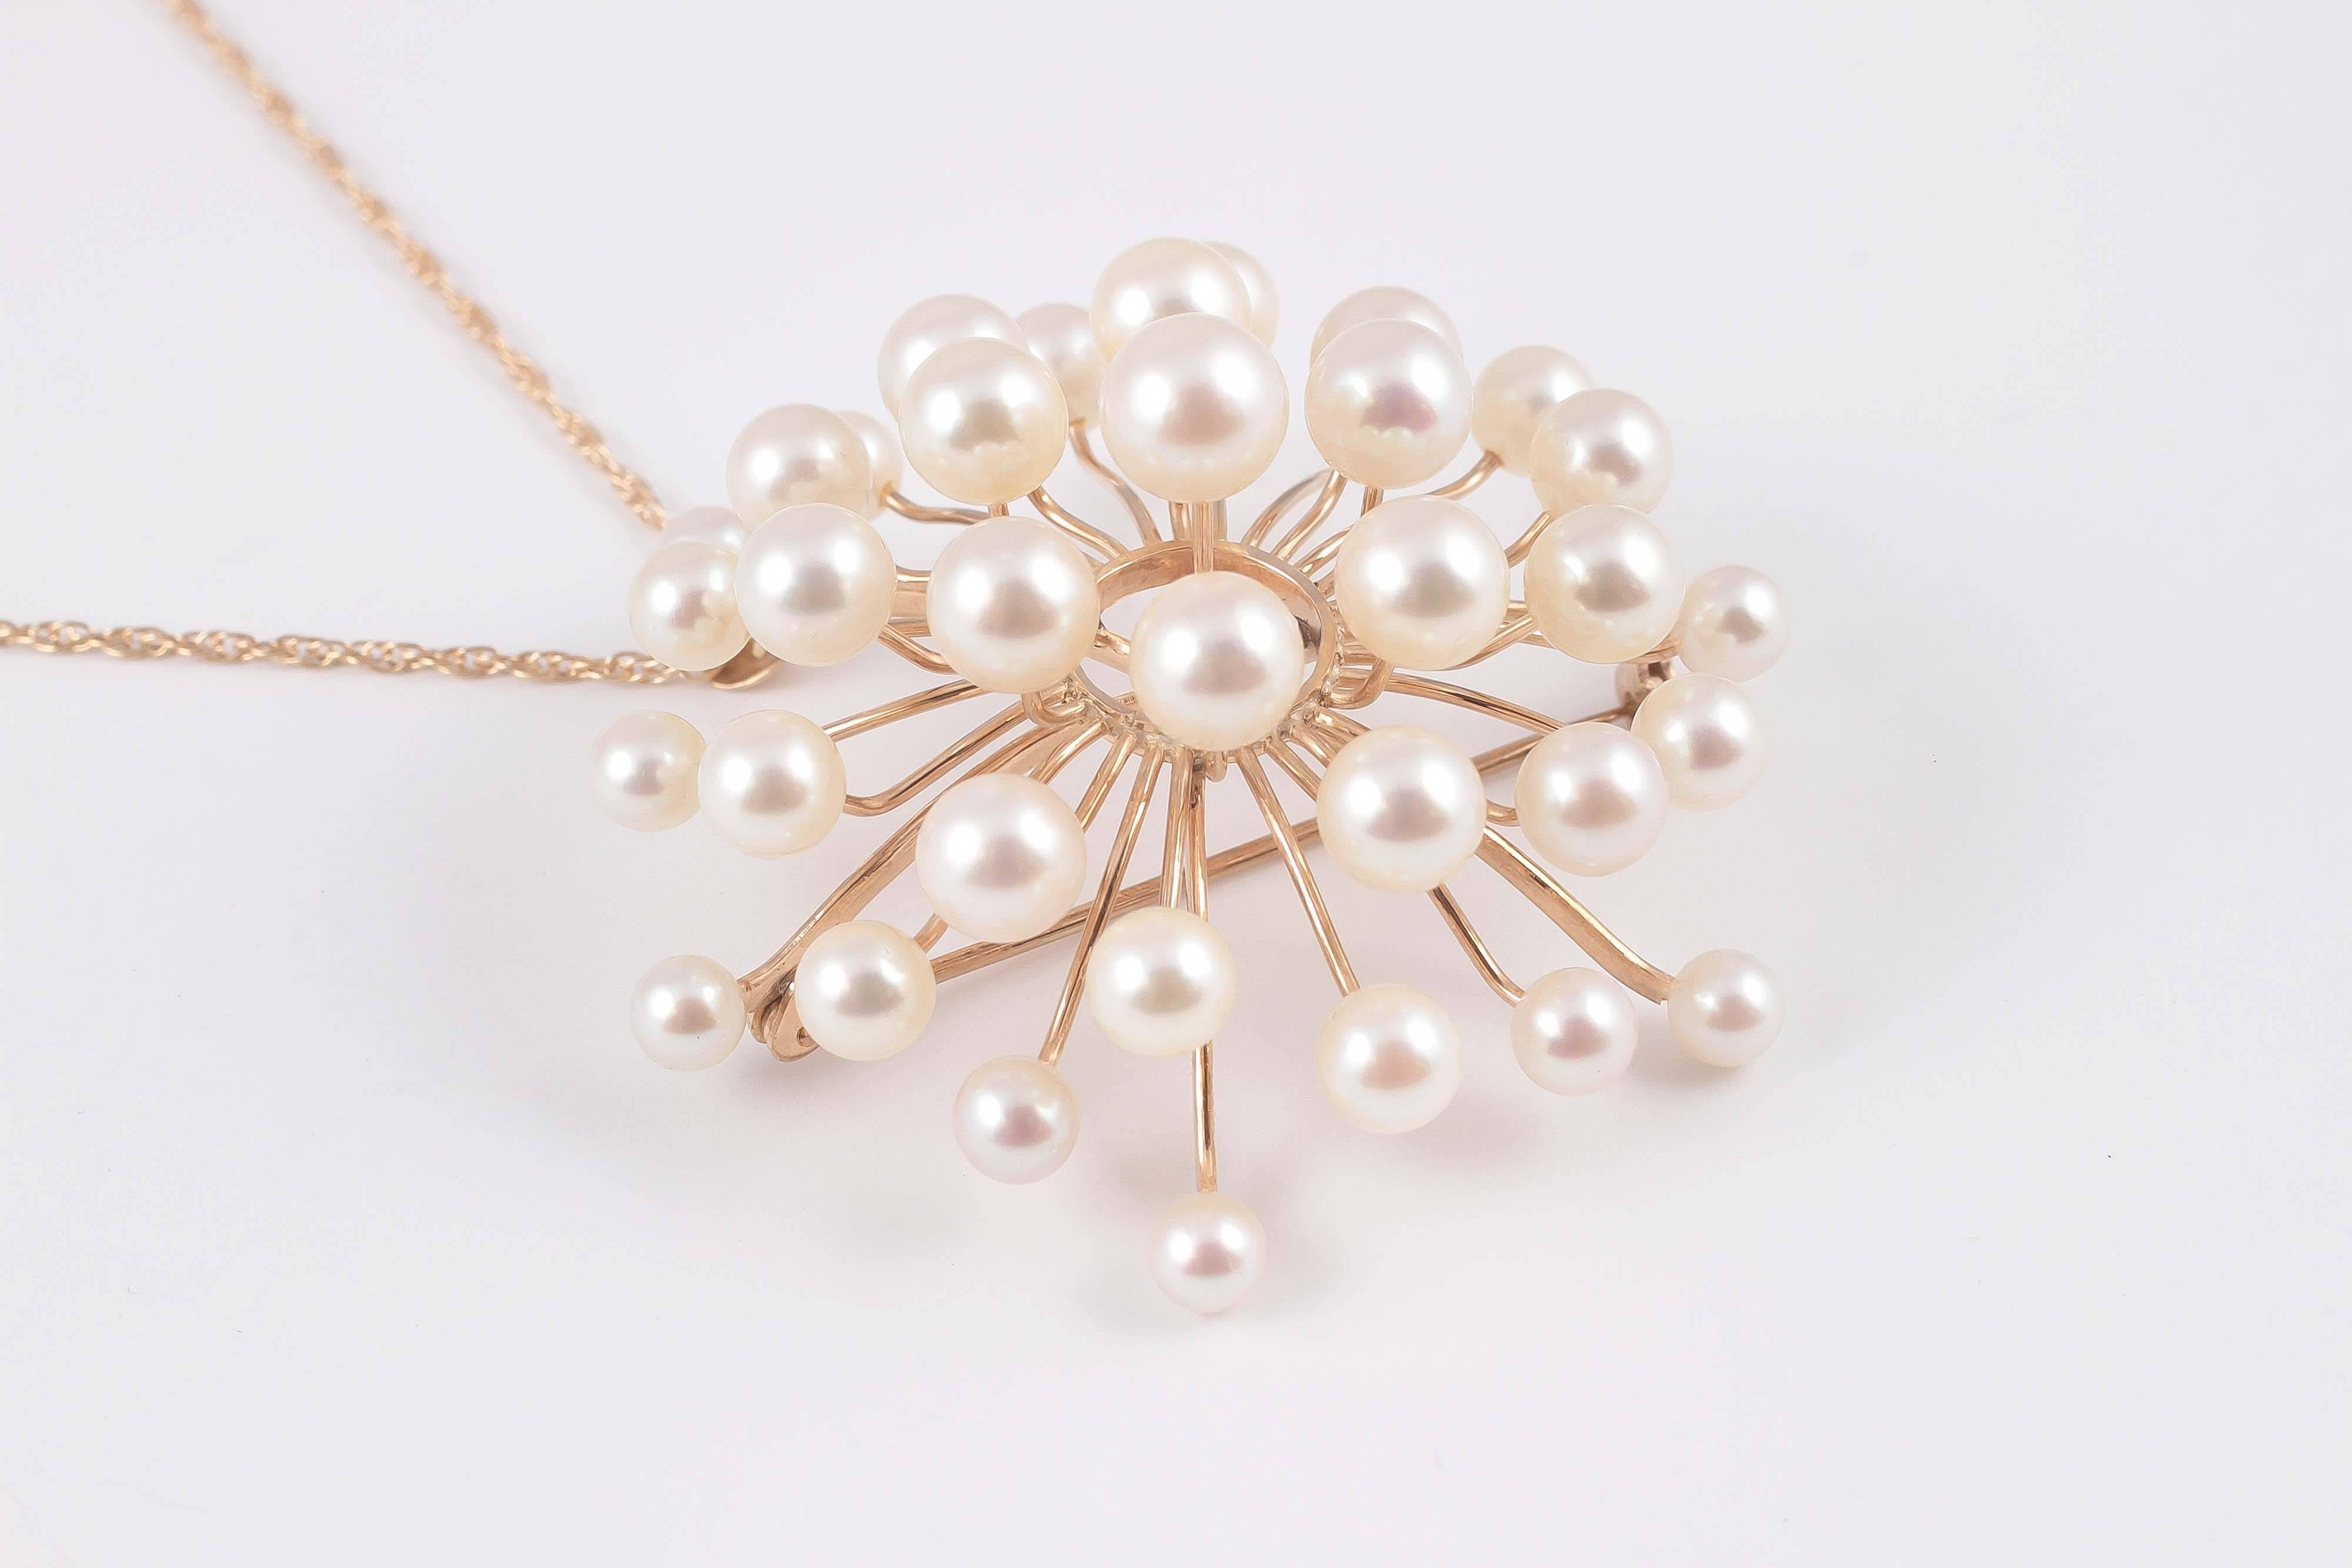 Women's 1970's Gold Pin Pendant in a Spray of Cultured Pearls